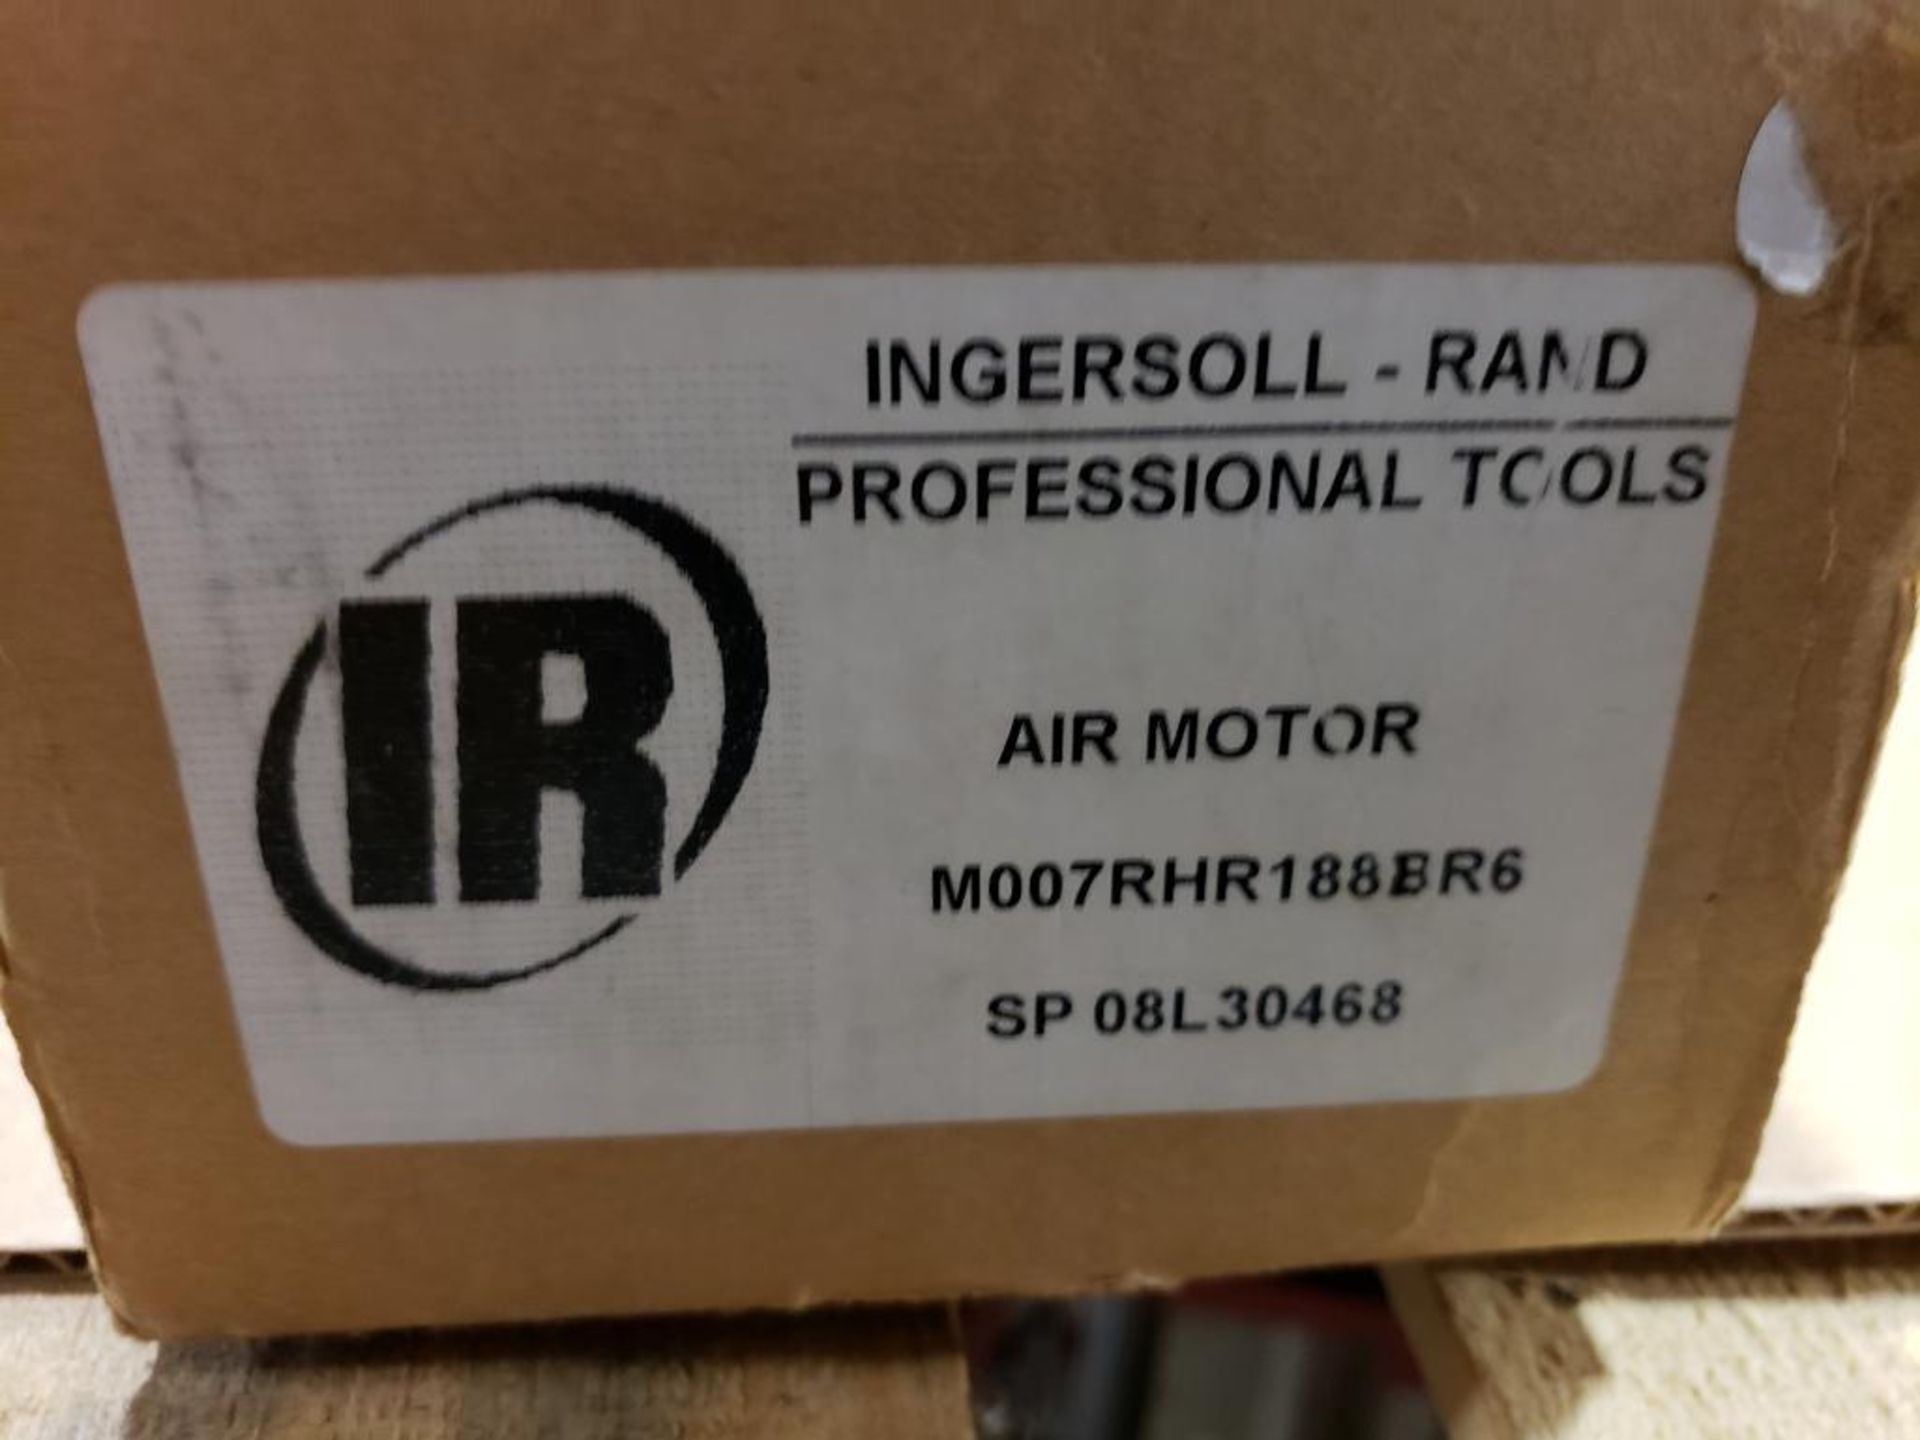 Ingersoll Rand Air Motor. M007RHR188R6. 103RPM, 224 FT. LBS. Max. New in box. - Image 2 of 5